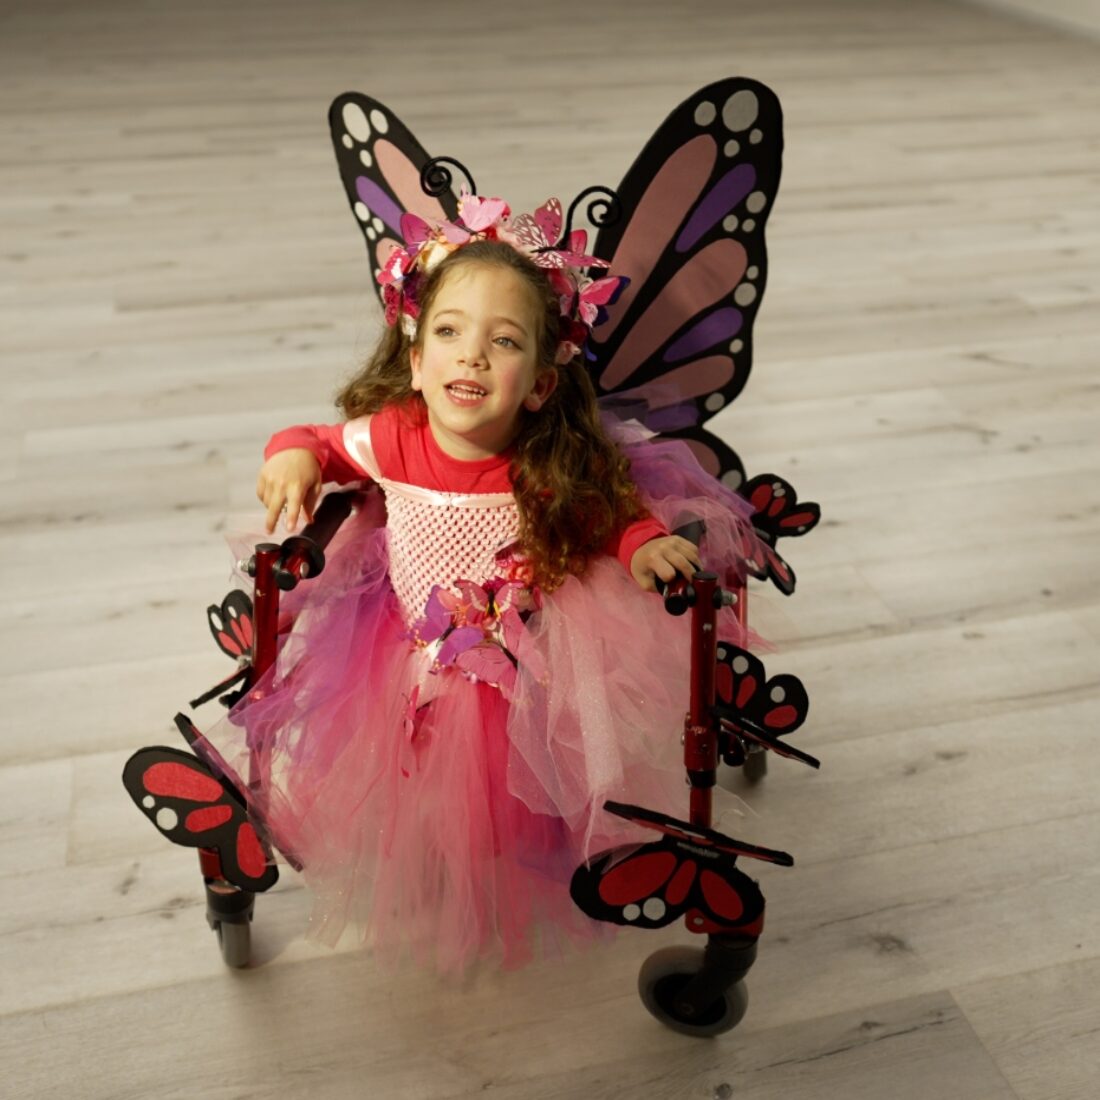 Beit Issie Shapiro and the Holon Institute of Technology teamed up to create Purim costume designs that highlight the childâ€™s mobility device. Photo by Shy Brameli/Createit Studio